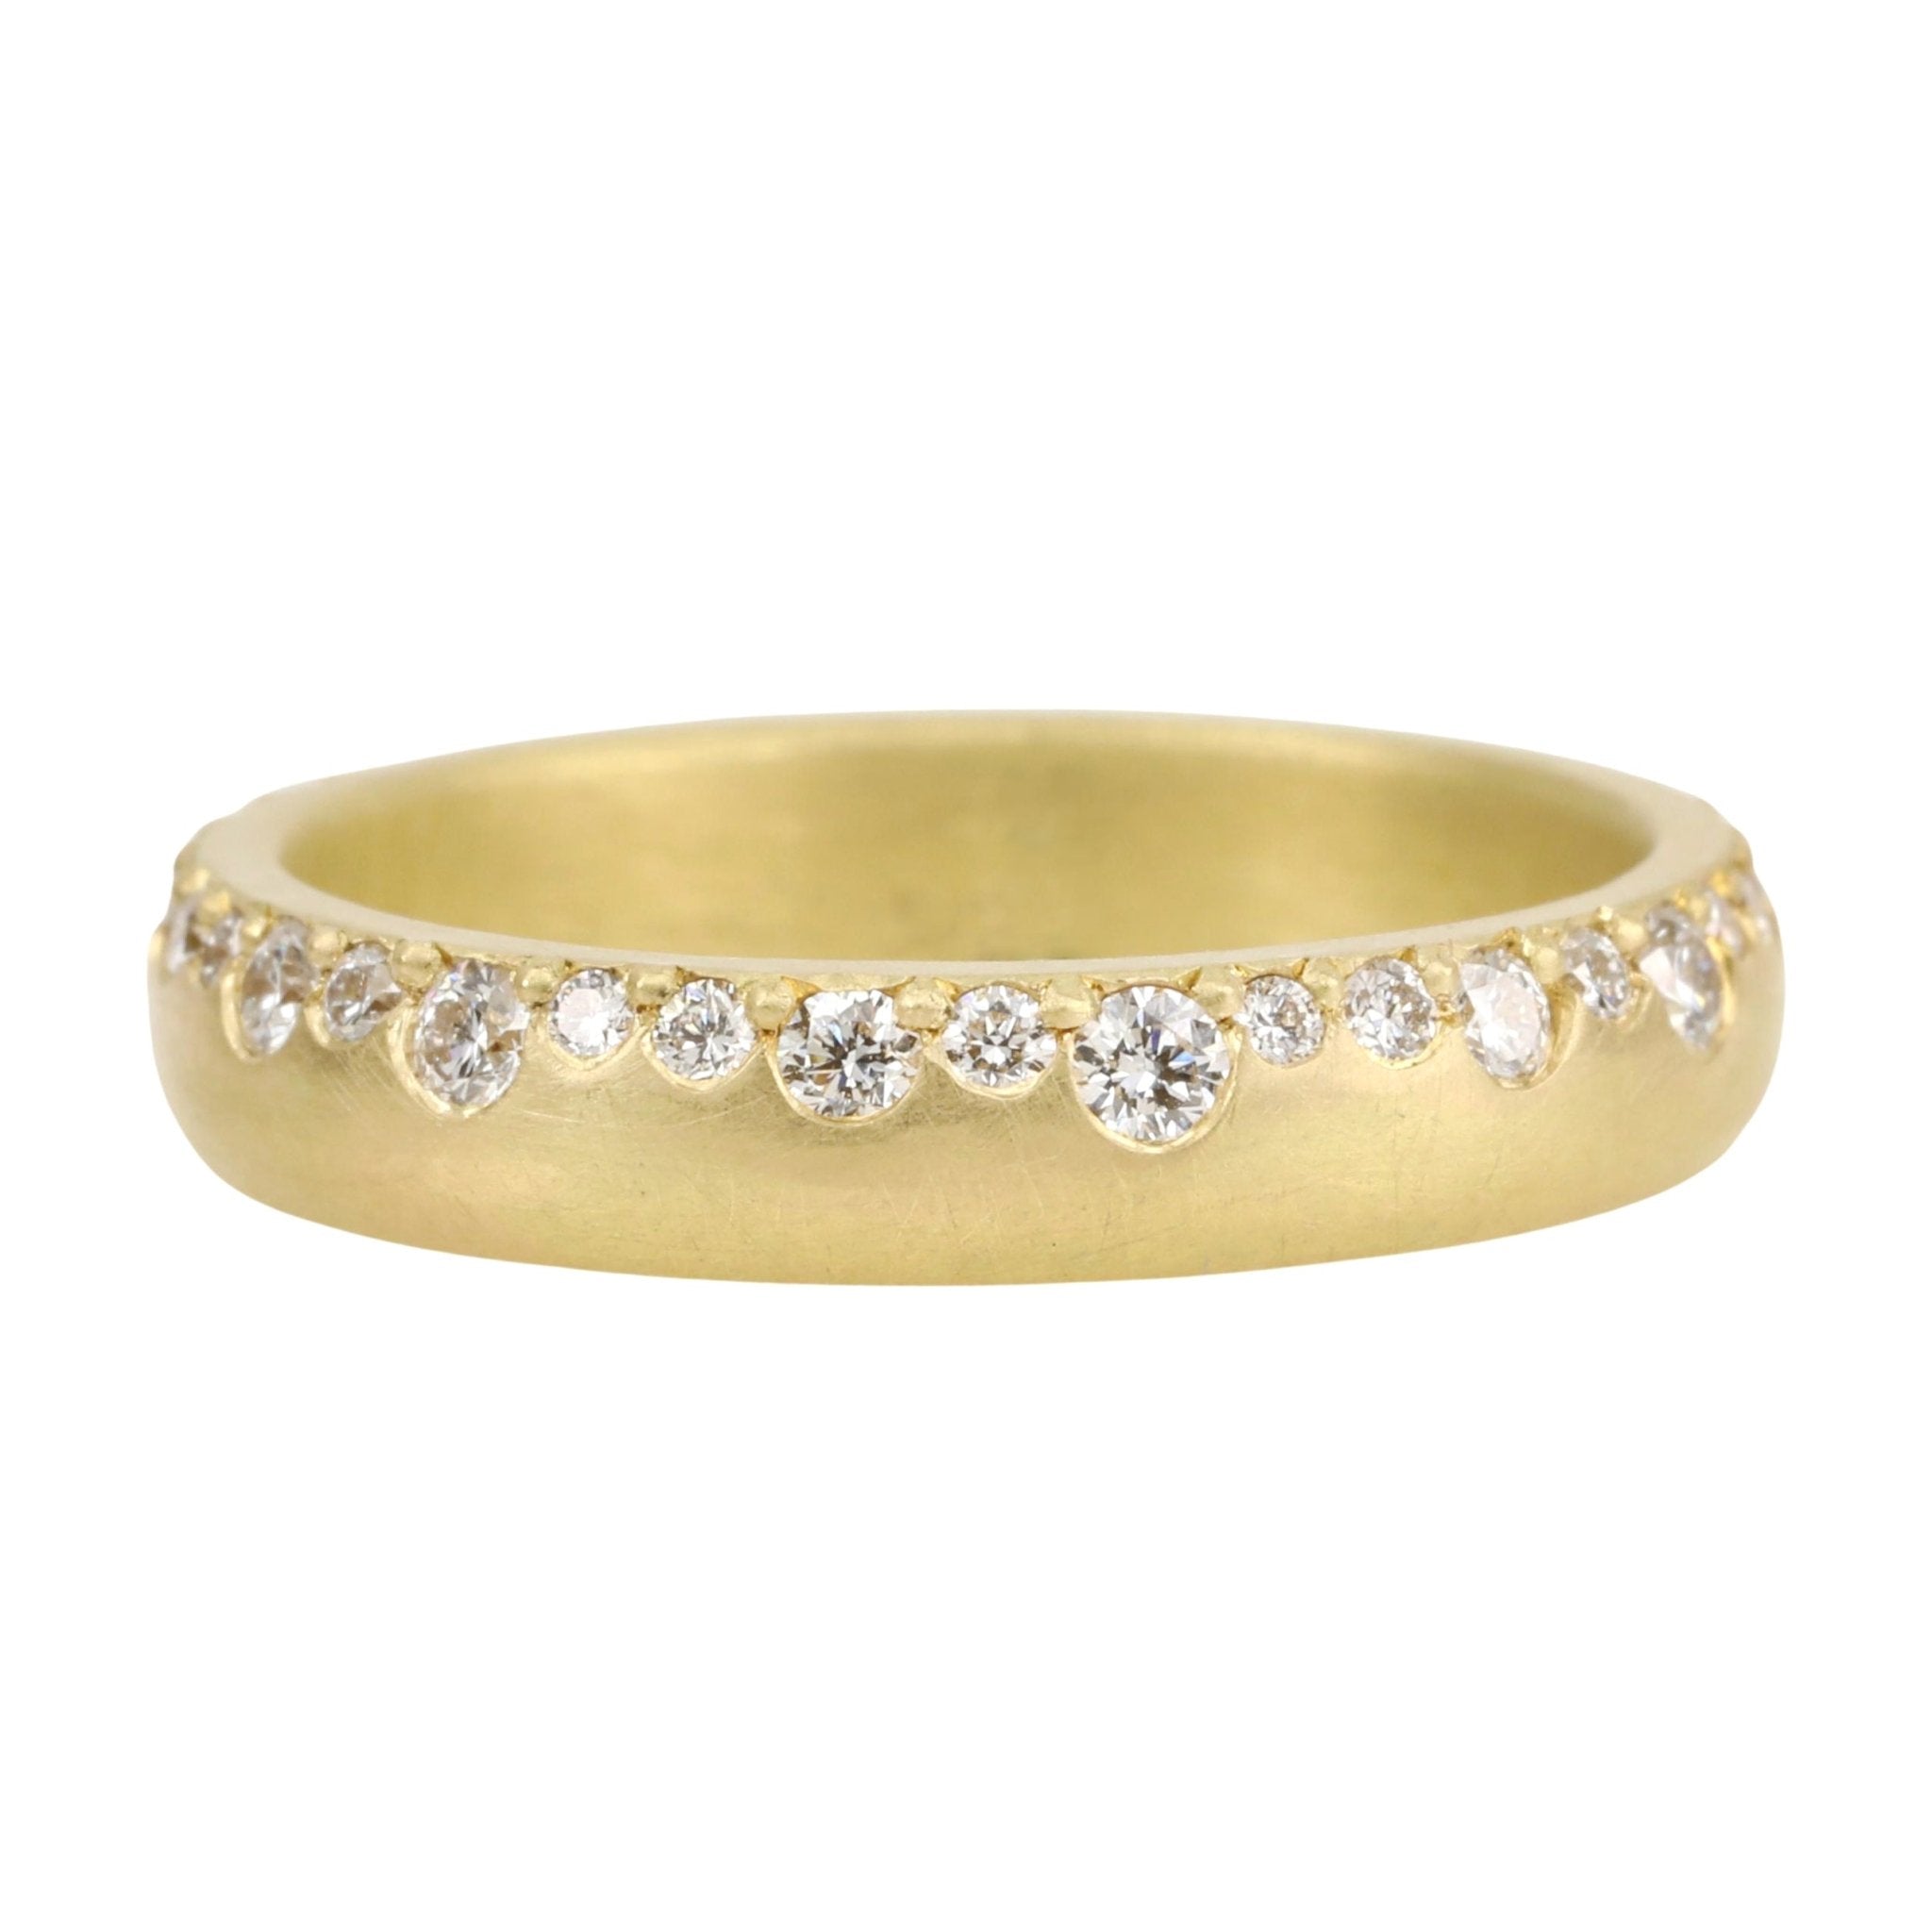 Annie Fensterstock Gold Half Rounded Band with Brilliant Diamonds